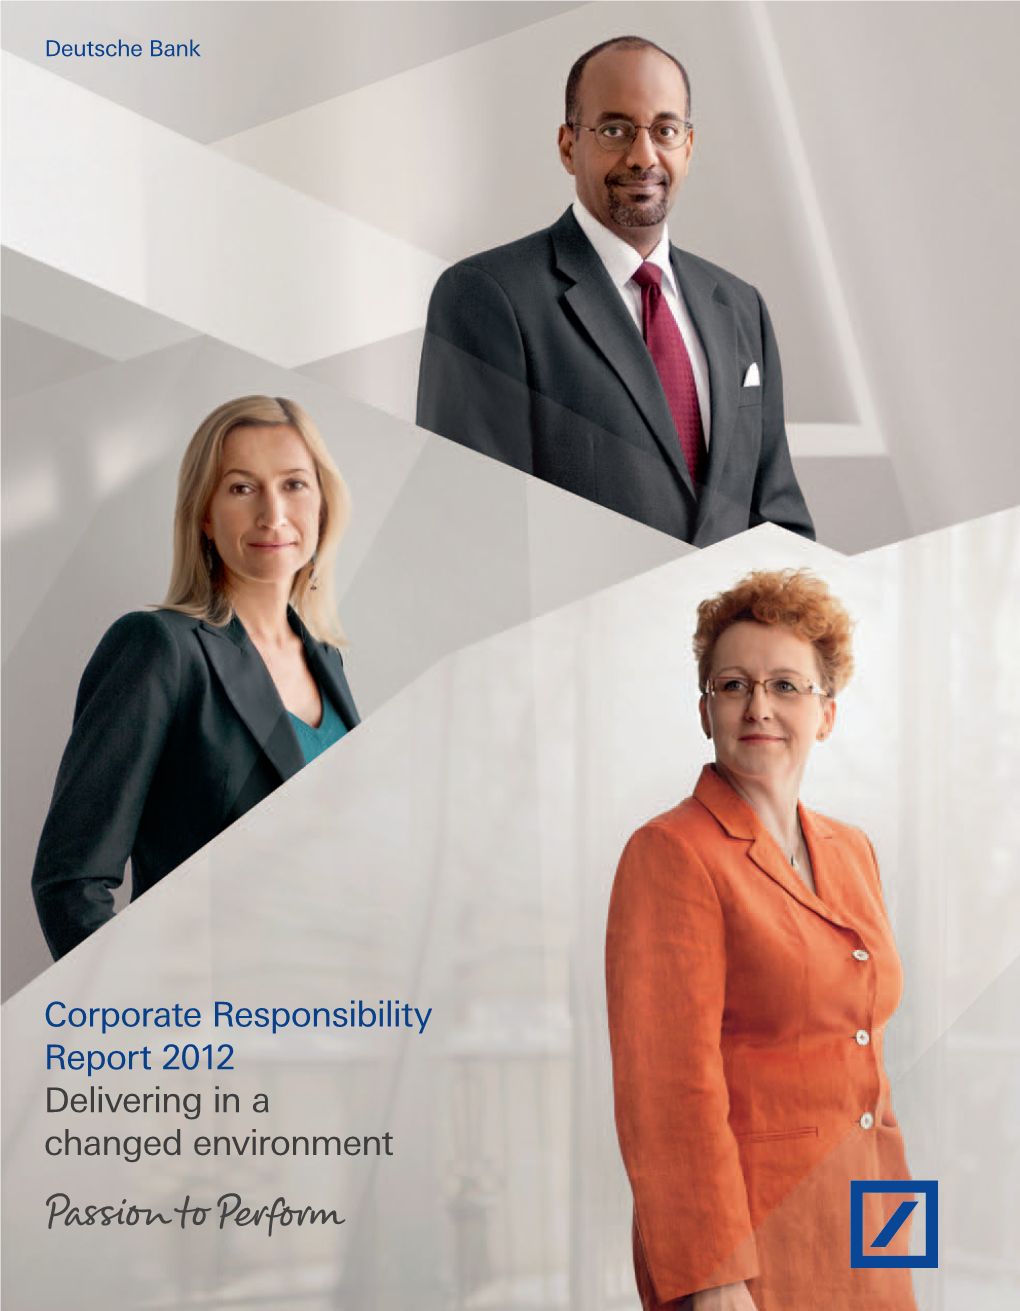 Corporate Responsibility Report 2012 Delivering in a Changed Environment